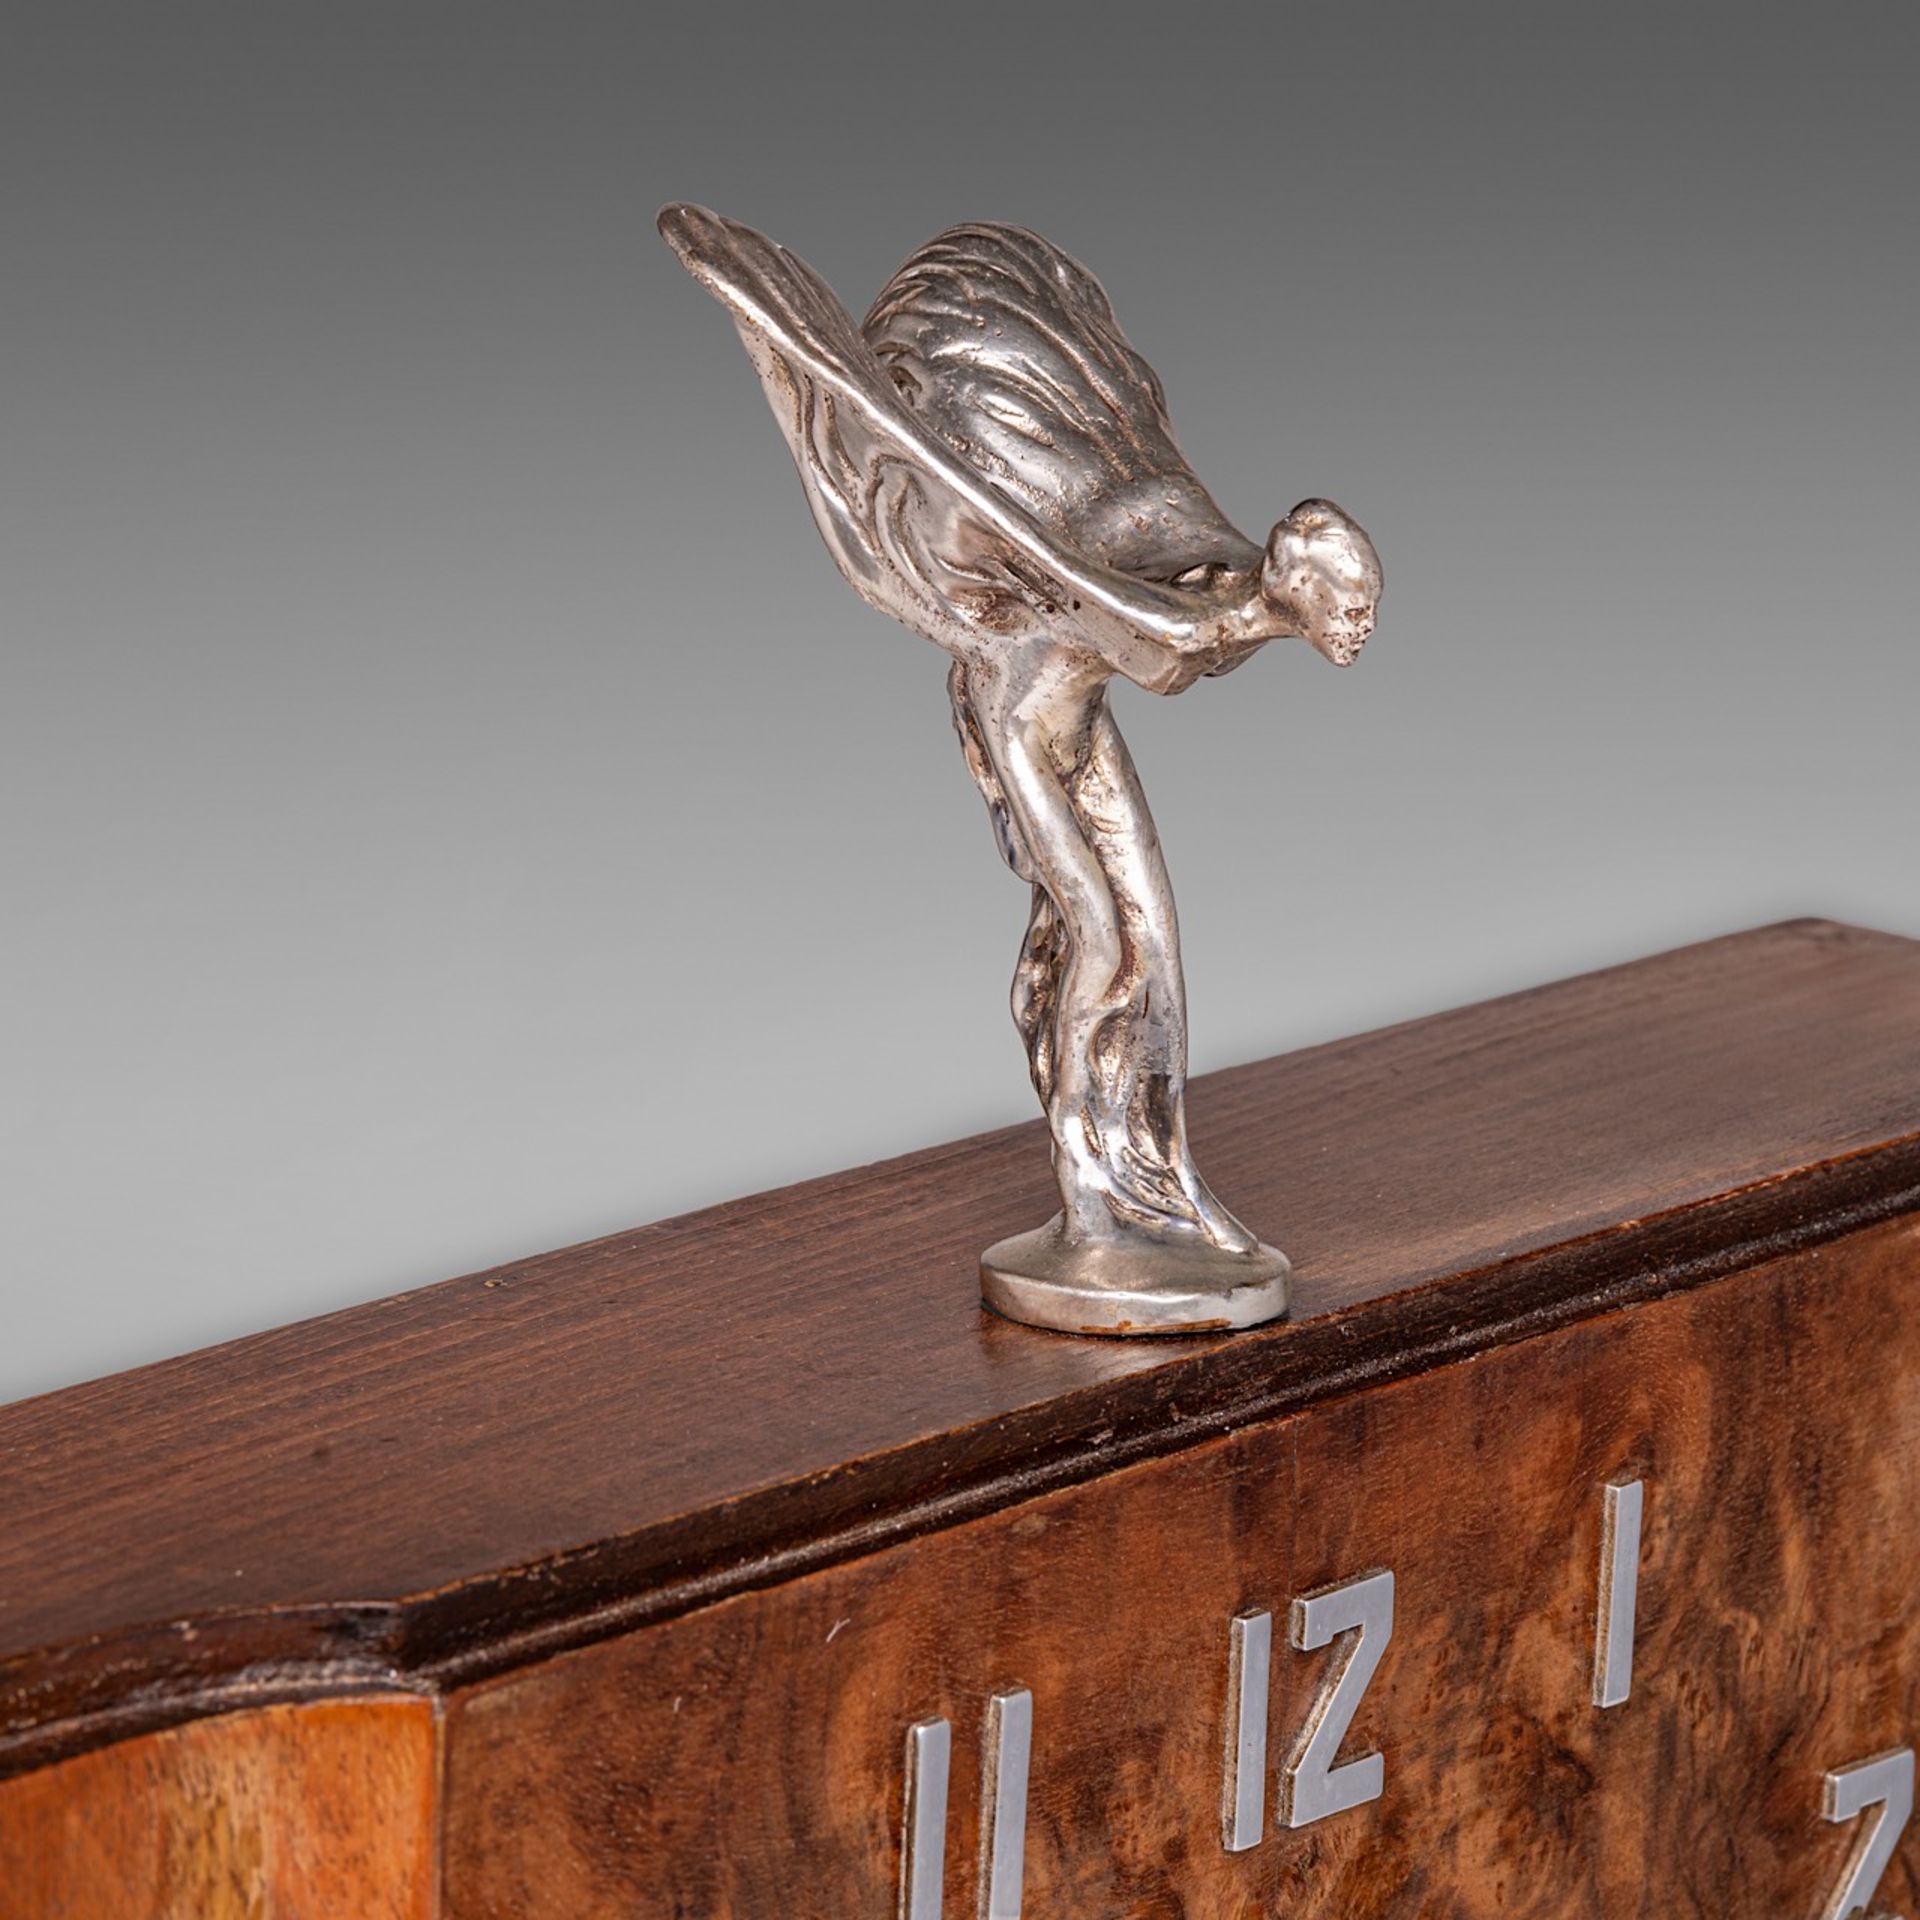 A mid-20th century Rolls-Royce burr wood electric mantle clock, H 35 - W 38 cm - Image 4 of 7